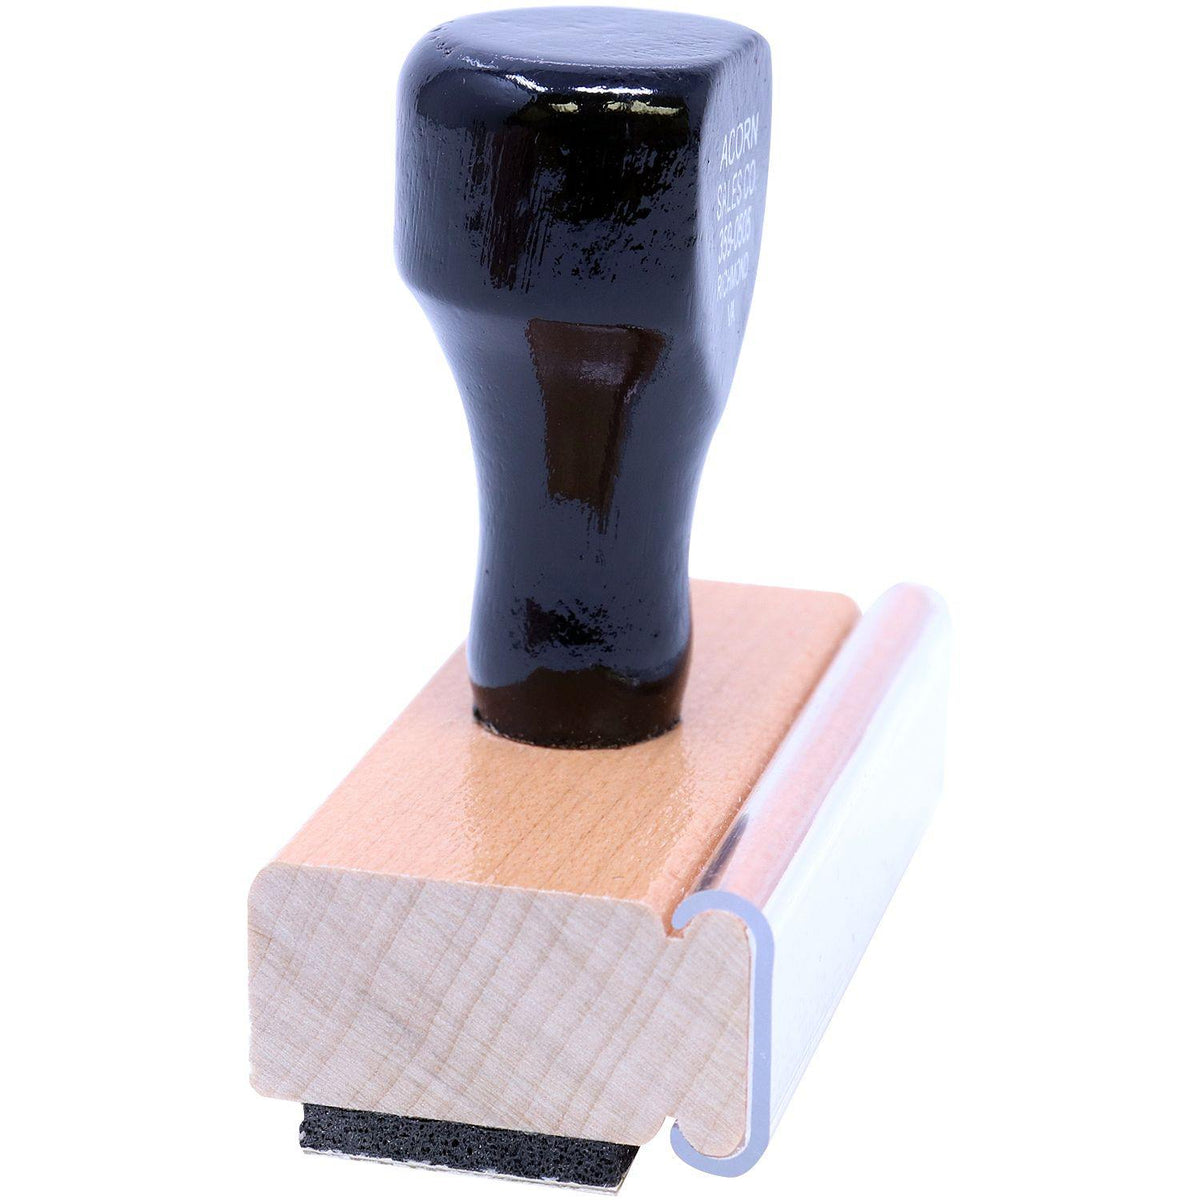 Side View of Home Equity Rubber Stamp at an Angle